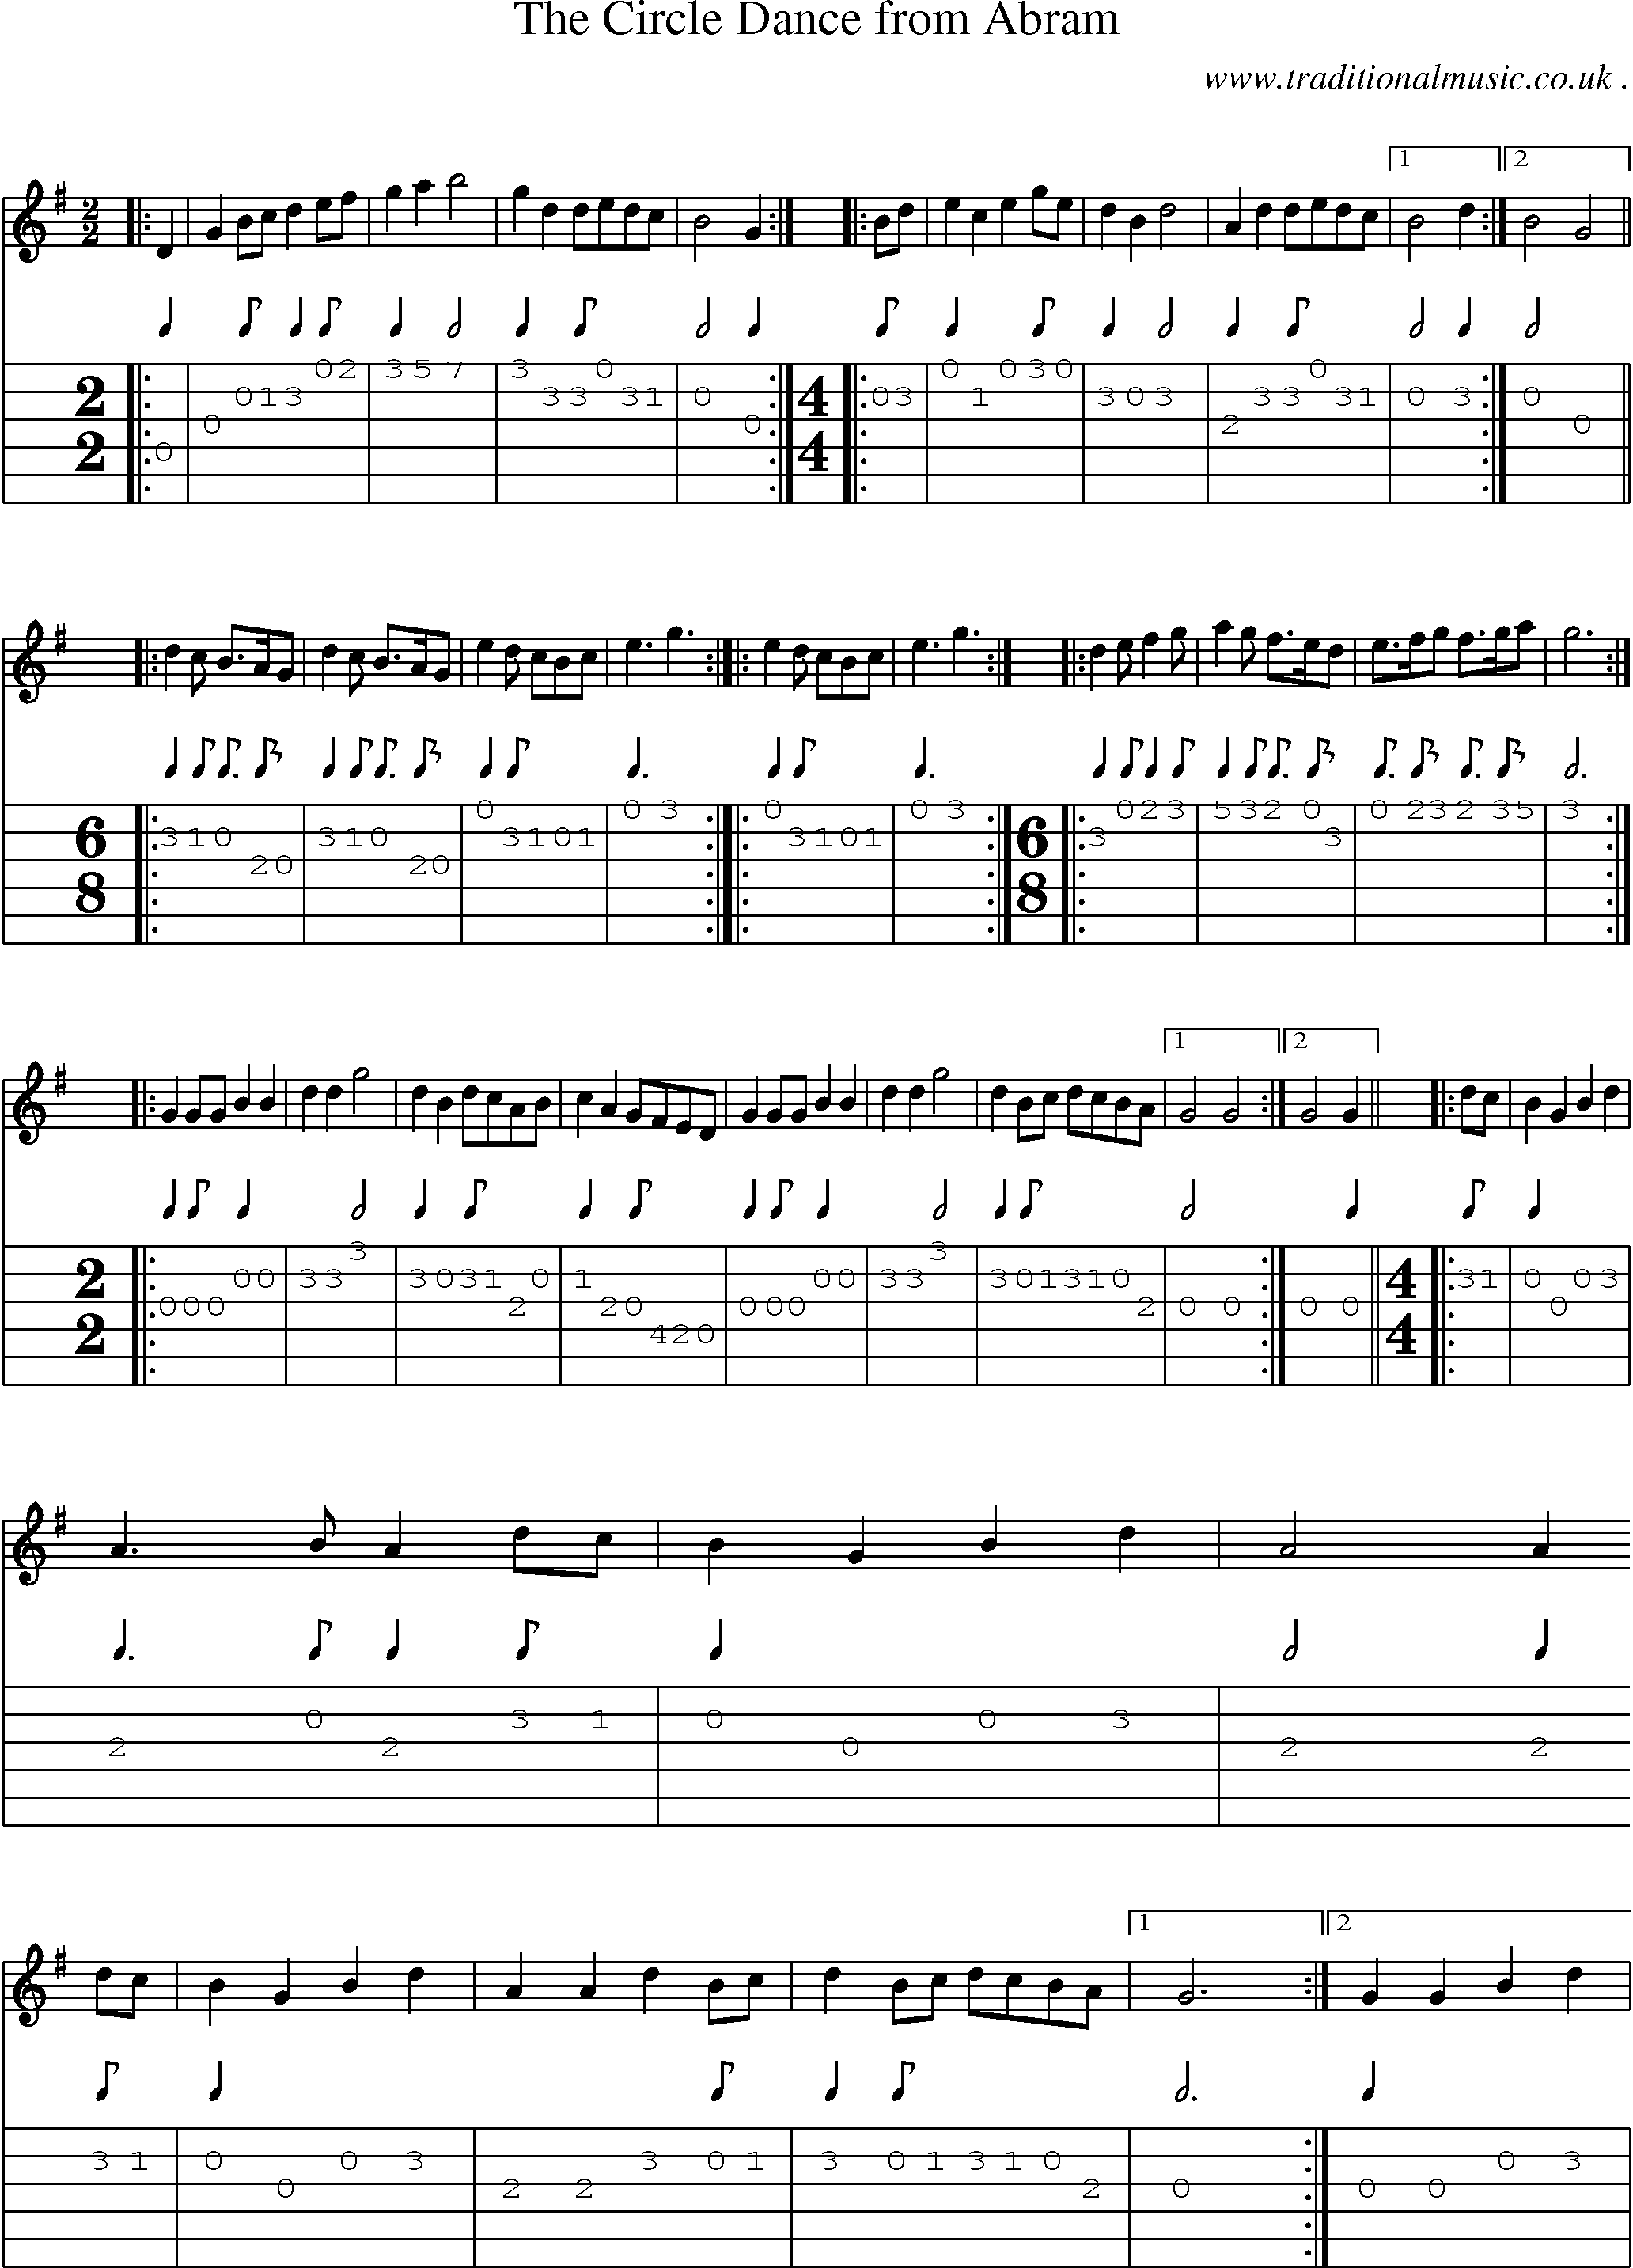 Sheet-Music and Guitar Tabs for The Circle Dance From Abram